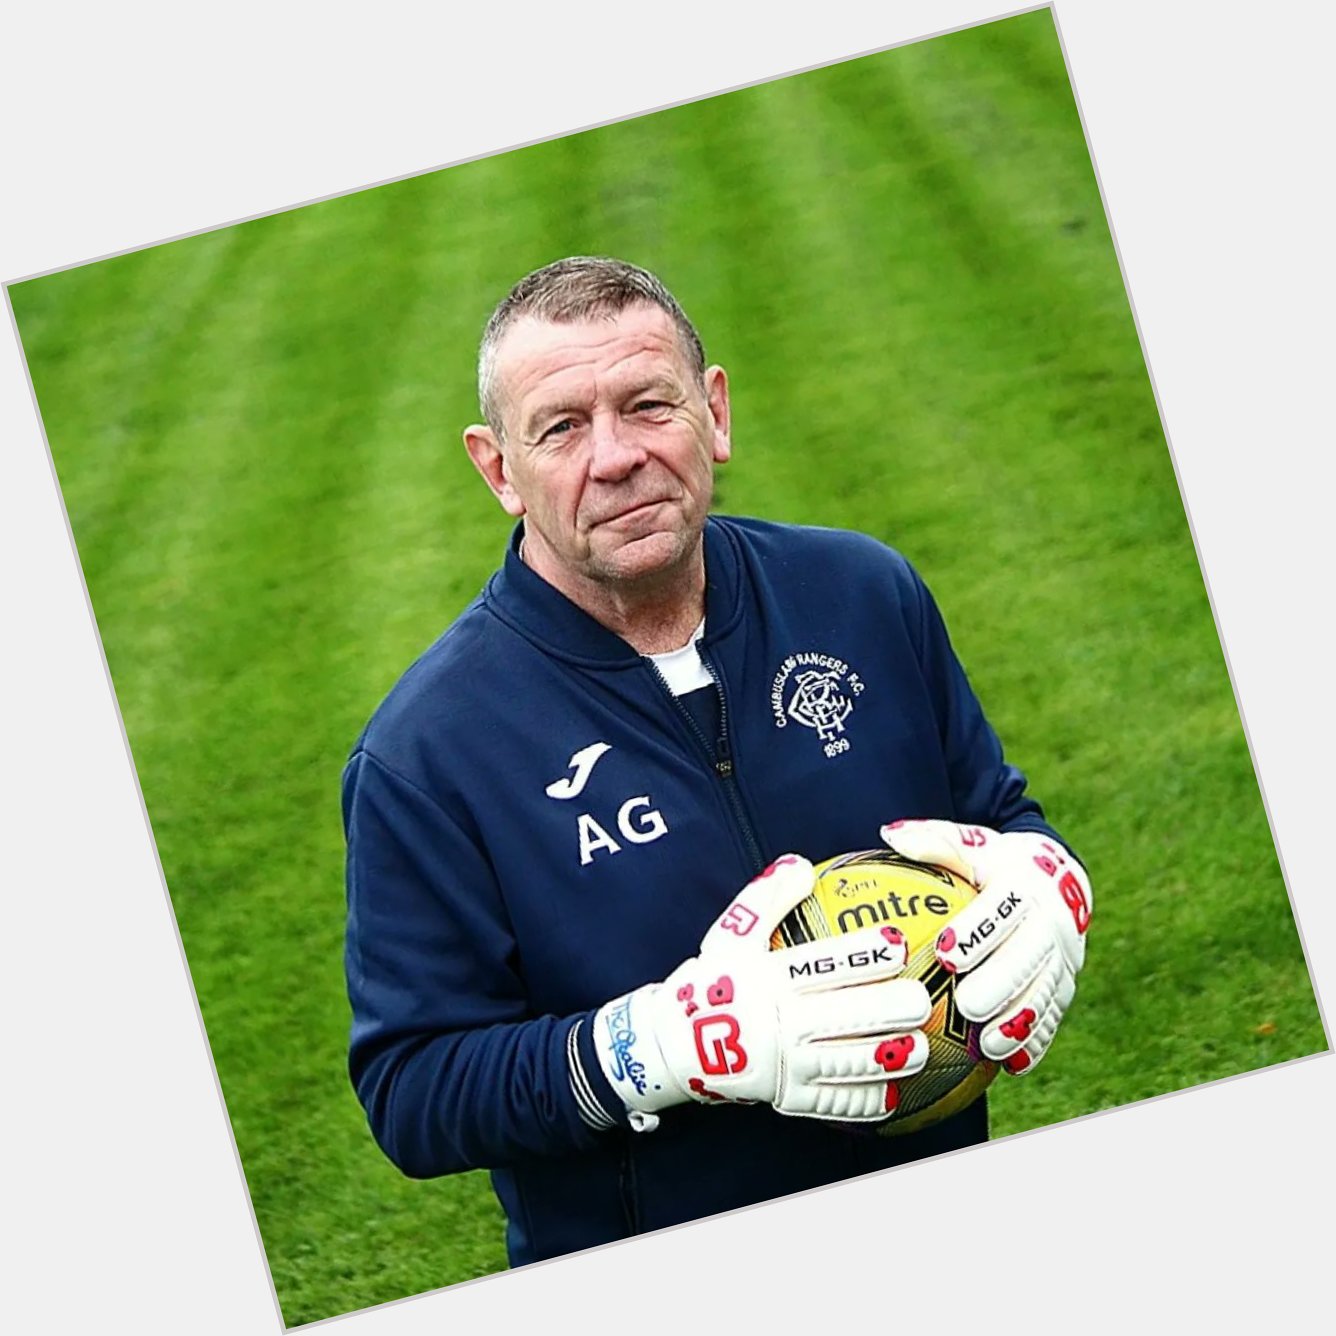  Happy Birthday to The Goalie, Andy Goram

We appreciate all your work this season 